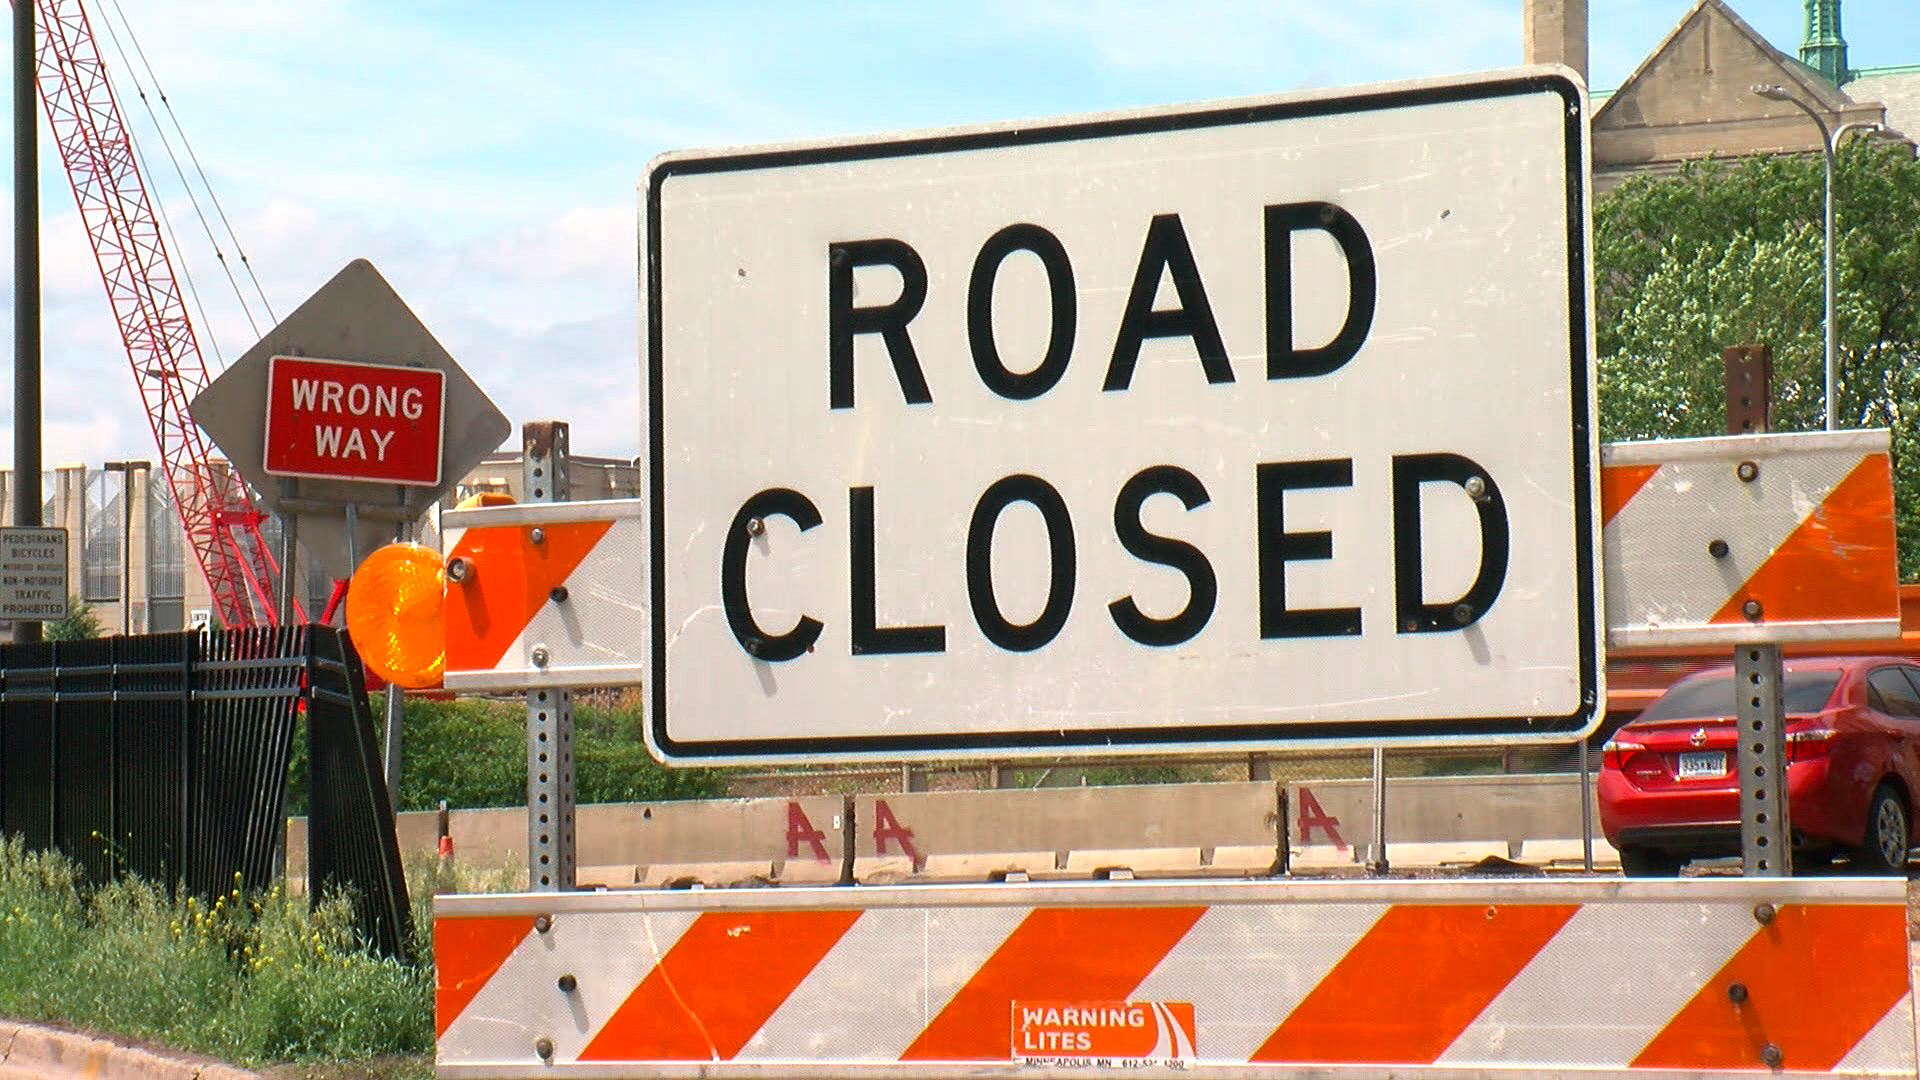 Highway 10 Closing In Both Directions In Anoka Area This Weekend